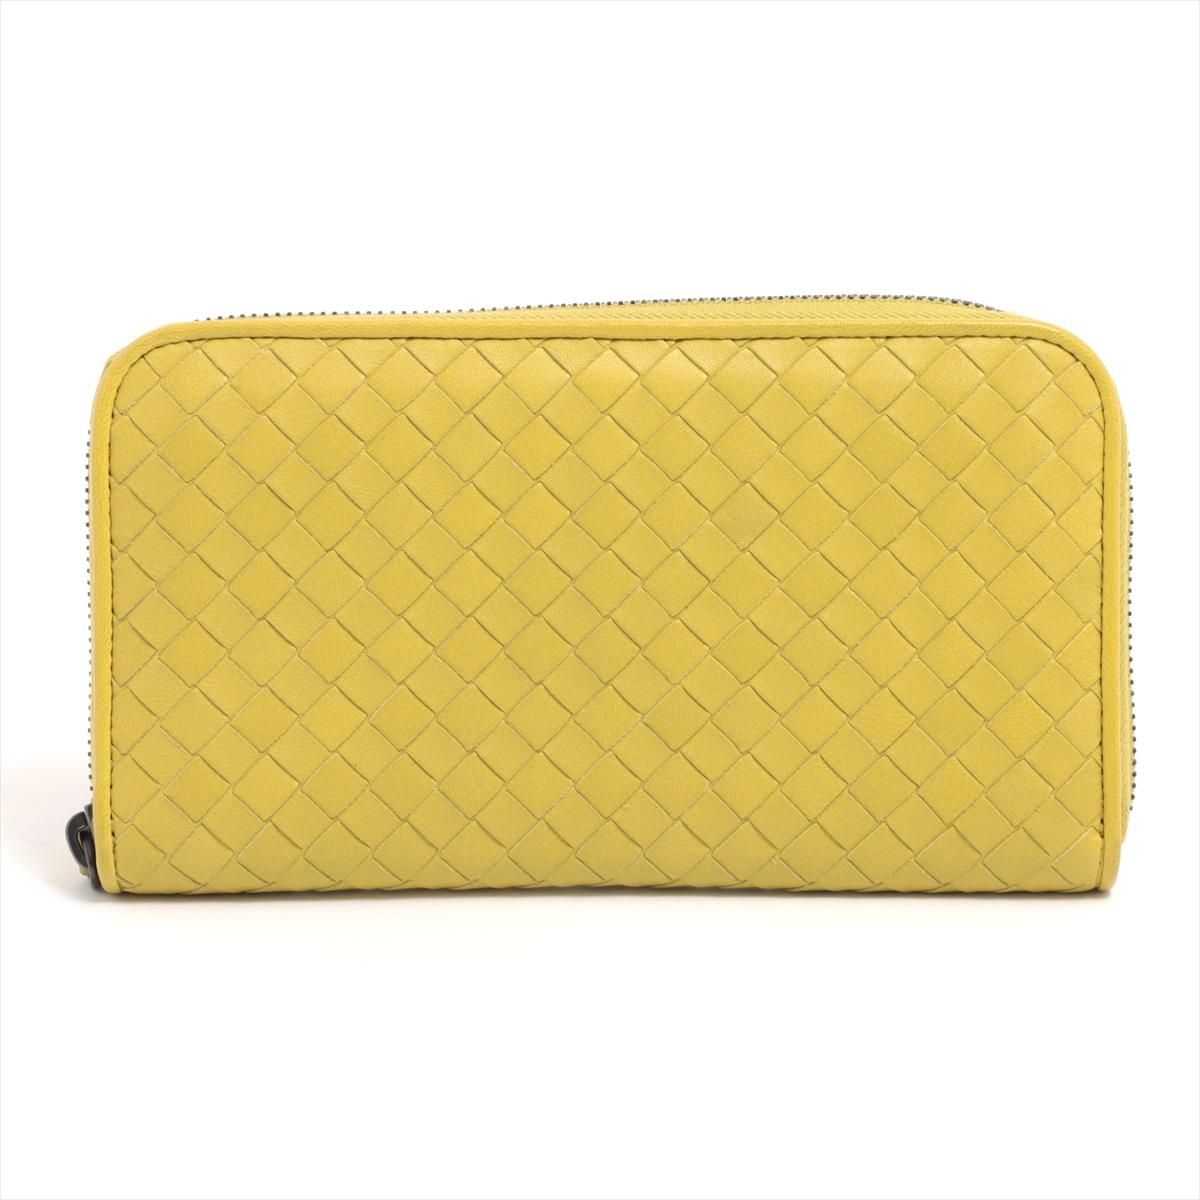 The Bottega Veneta Intrecciato Leather Zippy Wallet in Yellow Gold is a luxurious and sophisticated accessory that showcases the brand's iconic craftsmanship. Crafted from high-quality leather with Bottega Veneta's signature Intrecciato weaving